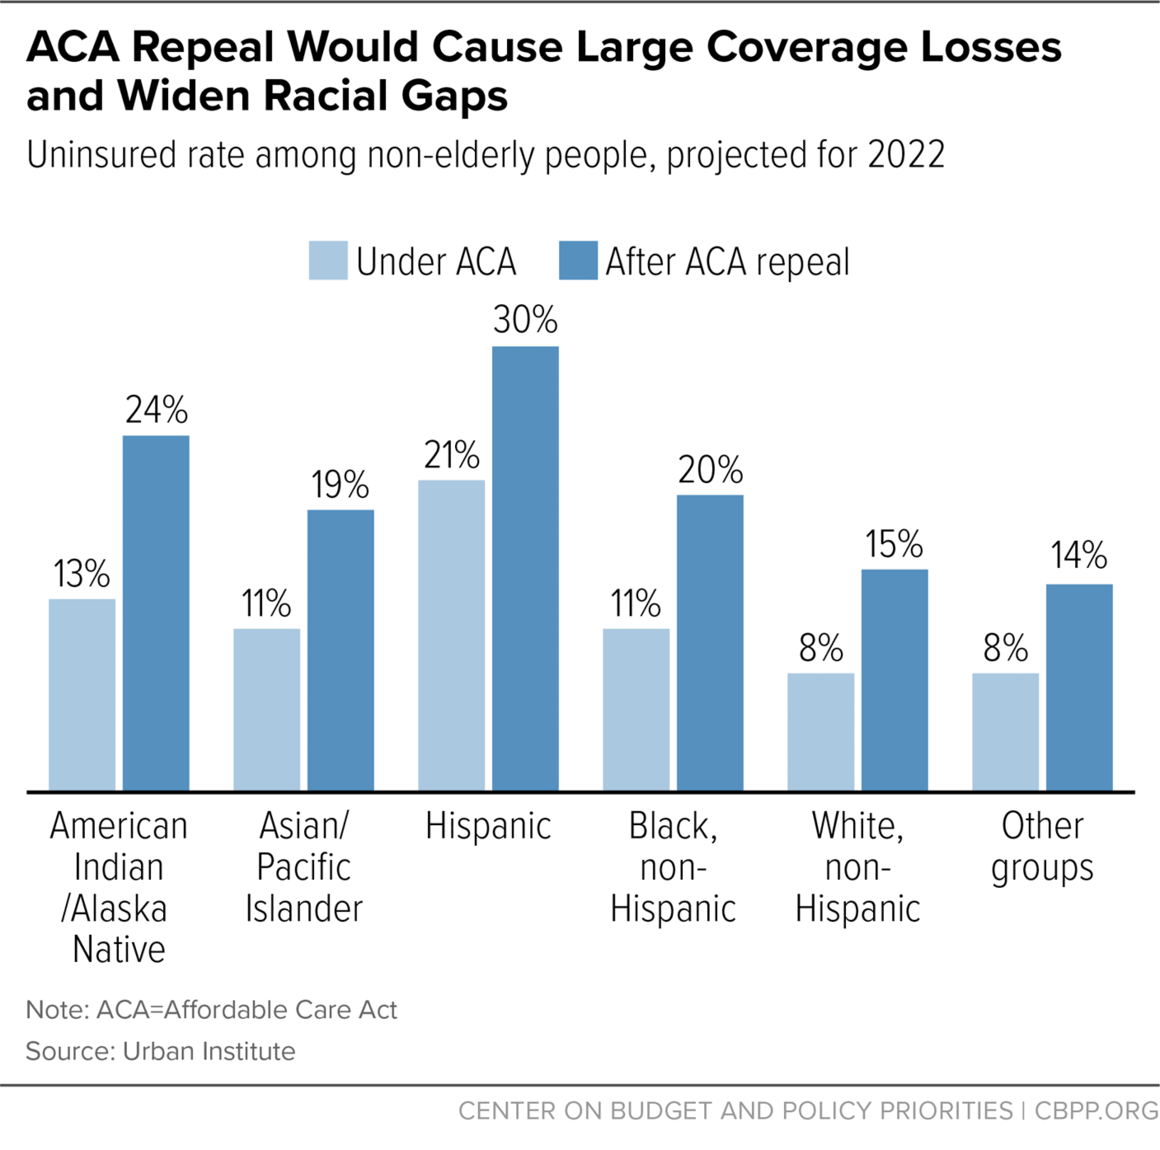 ACA Repeal Would Cause Large Coverage Losses and Widen Racial Gaps